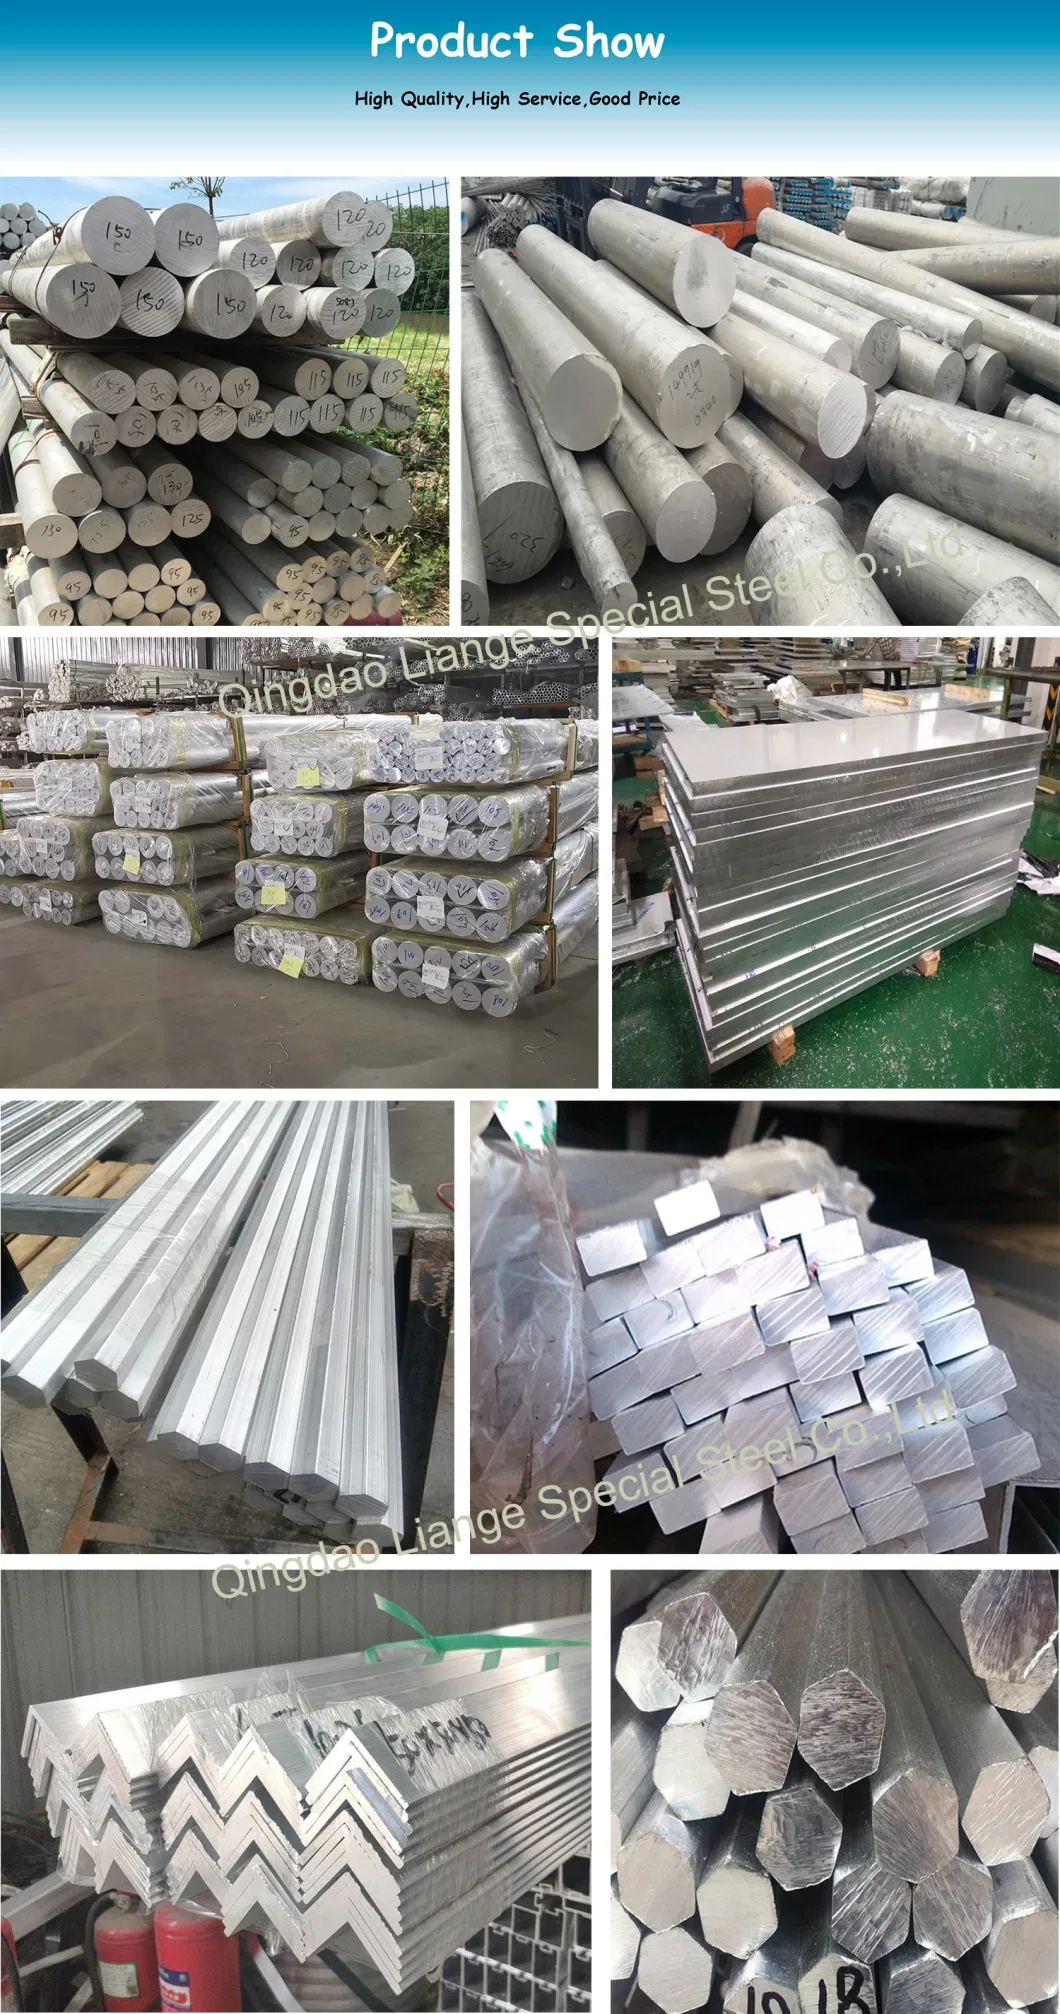 3003 2024 1100 1060 6063 6082 5005 5052 5083 5182 5754 T4 T6 Extruded Solid Aluminum Profile Bar Round Solid Rod Bar for High Quantity